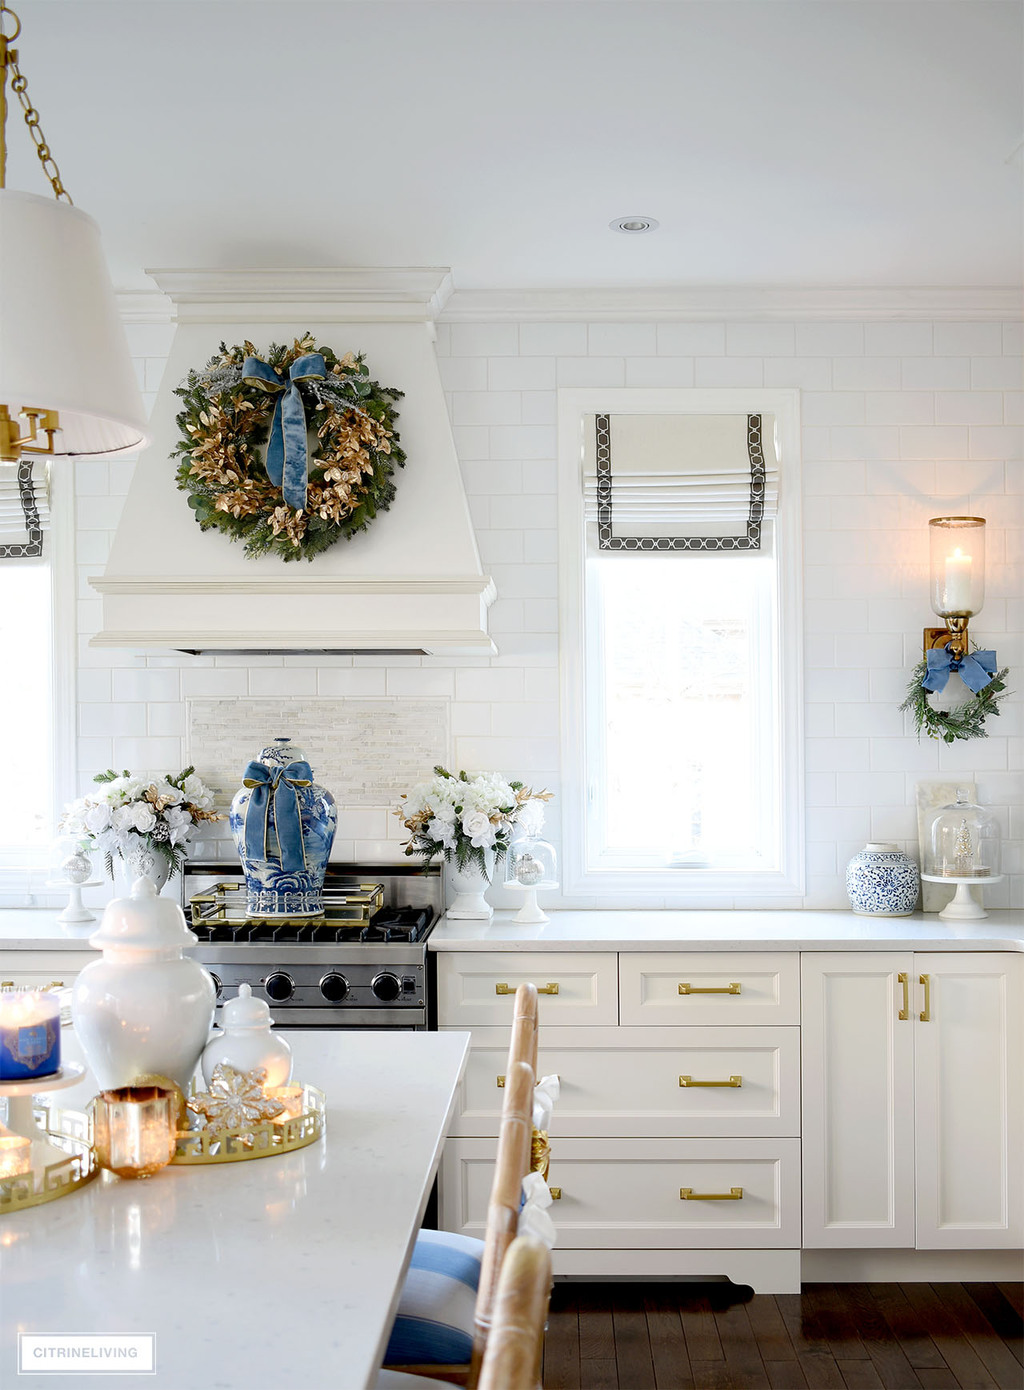 Sophisiticated Christmas Kitchen Decor in Blue and Red!